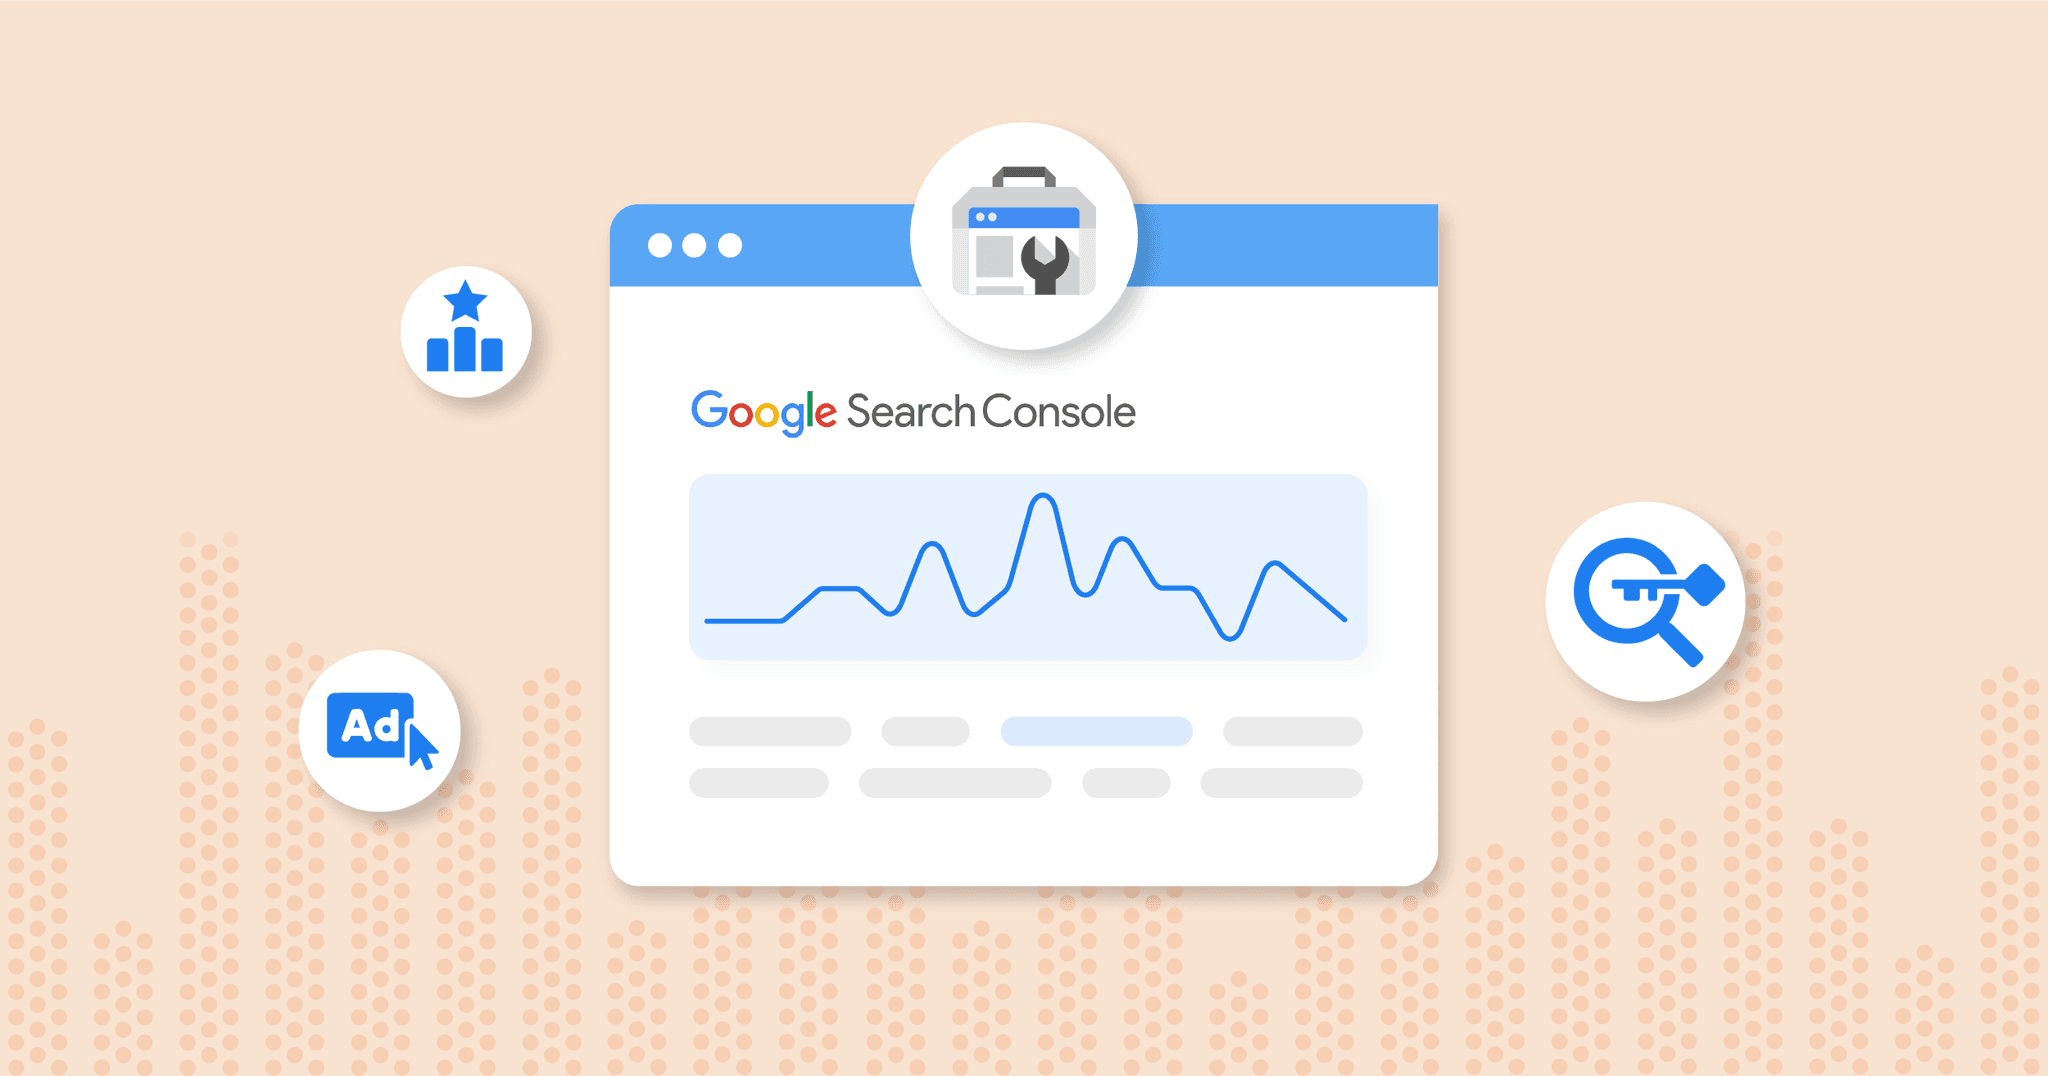 Google Search Console Analytics to Track

